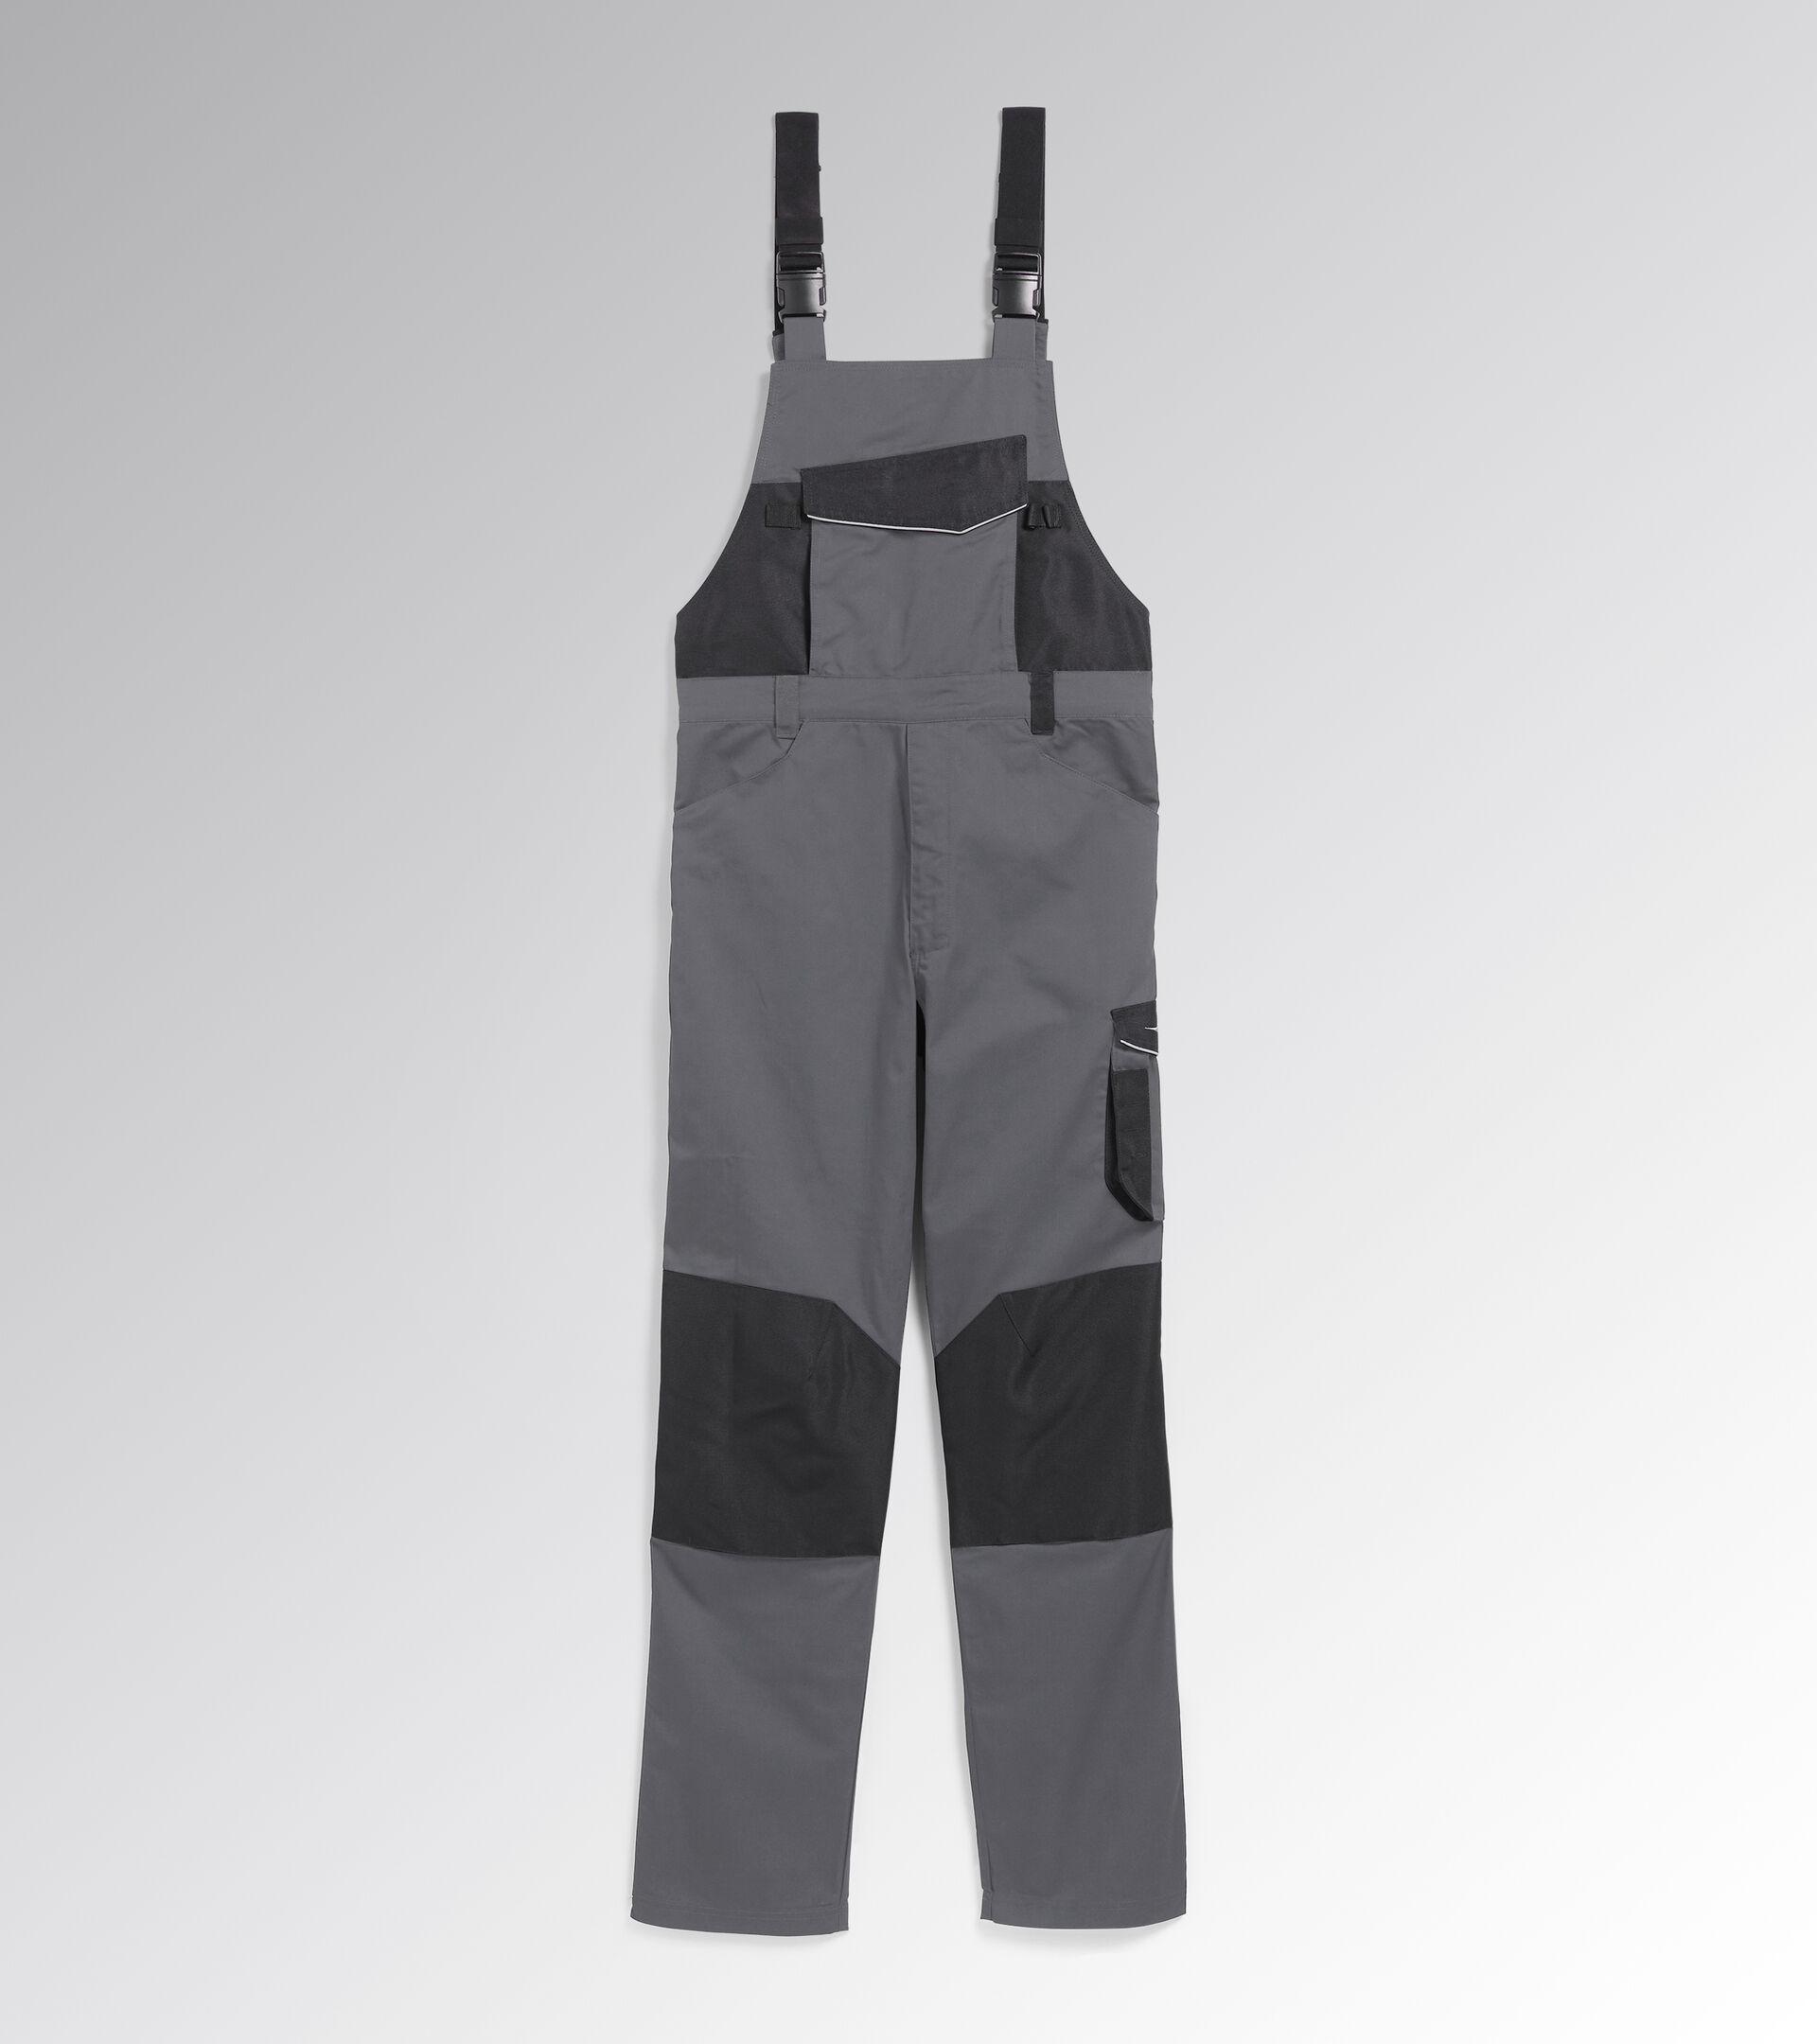 Work coveralls BIB OVERALL POLY STEEL GRAY - Utility